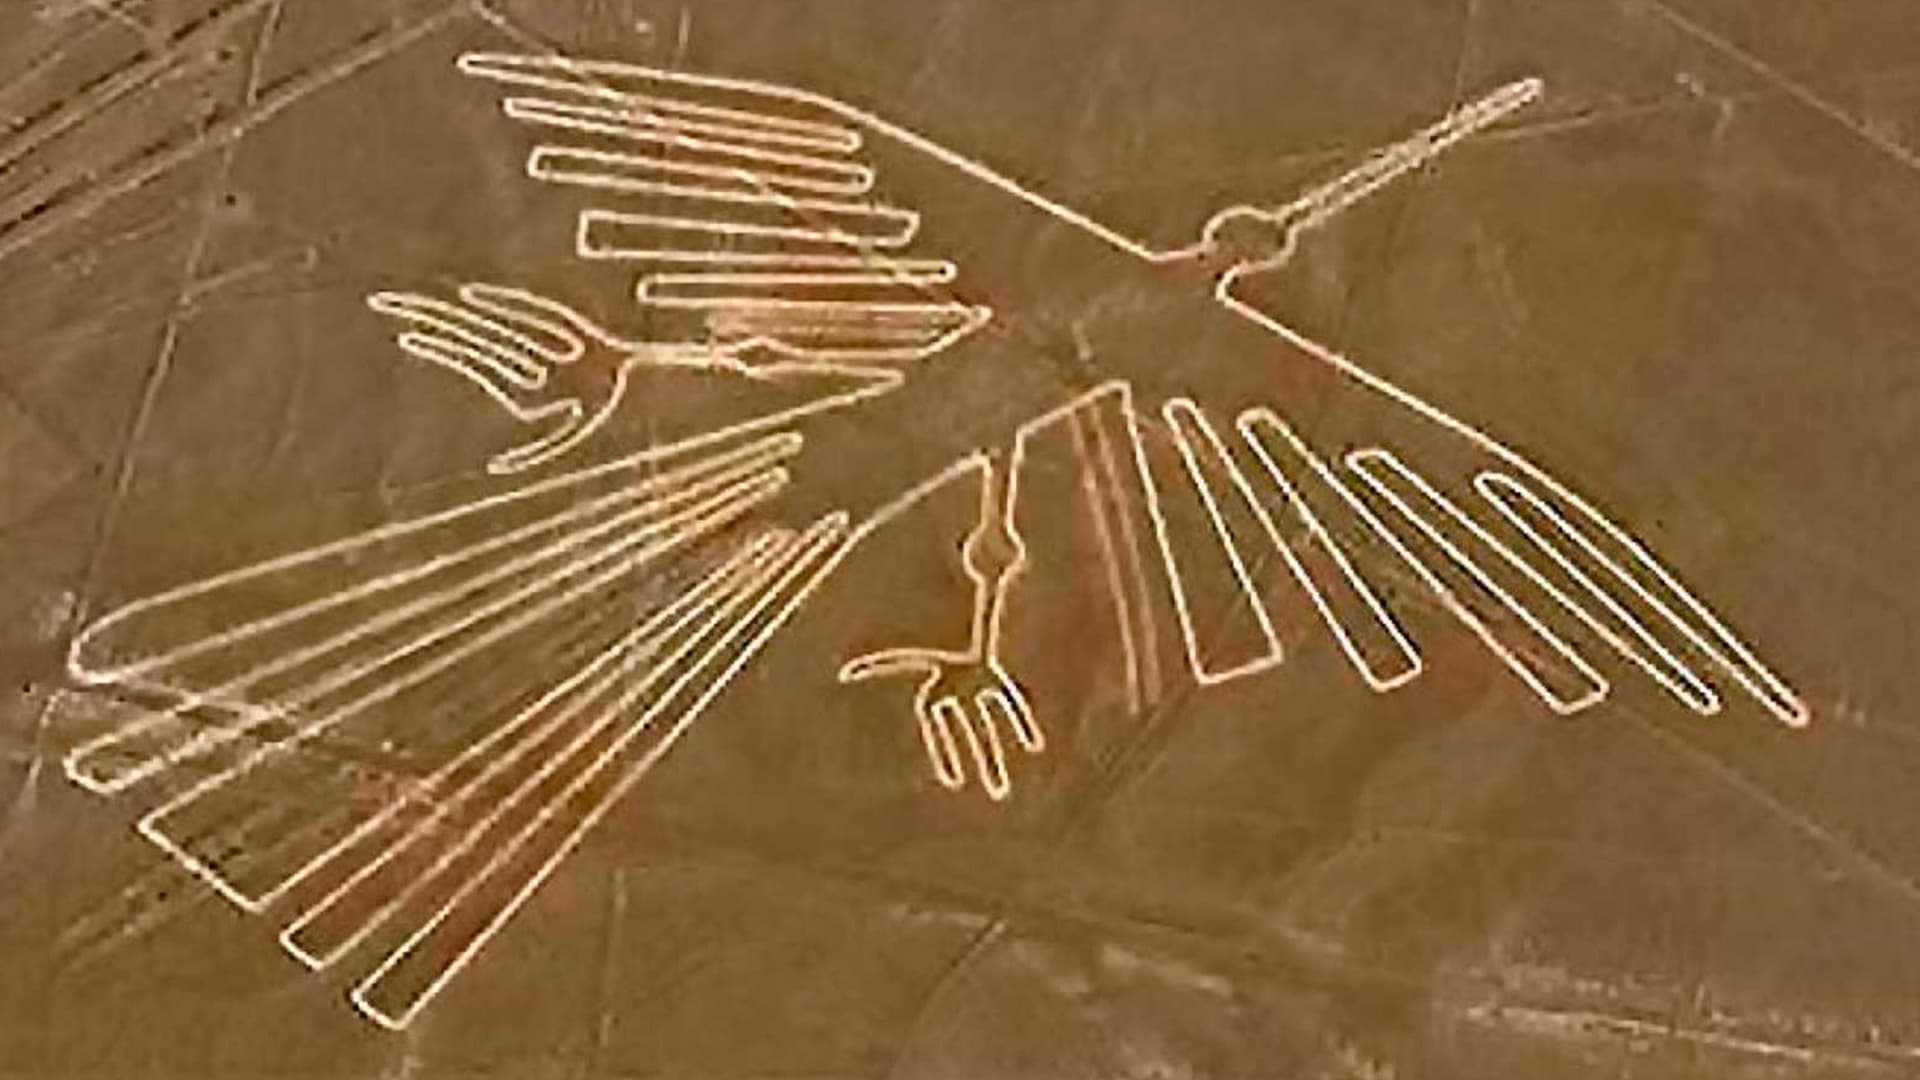 Trip to Nazca and flying over the mysterious Nazca lines